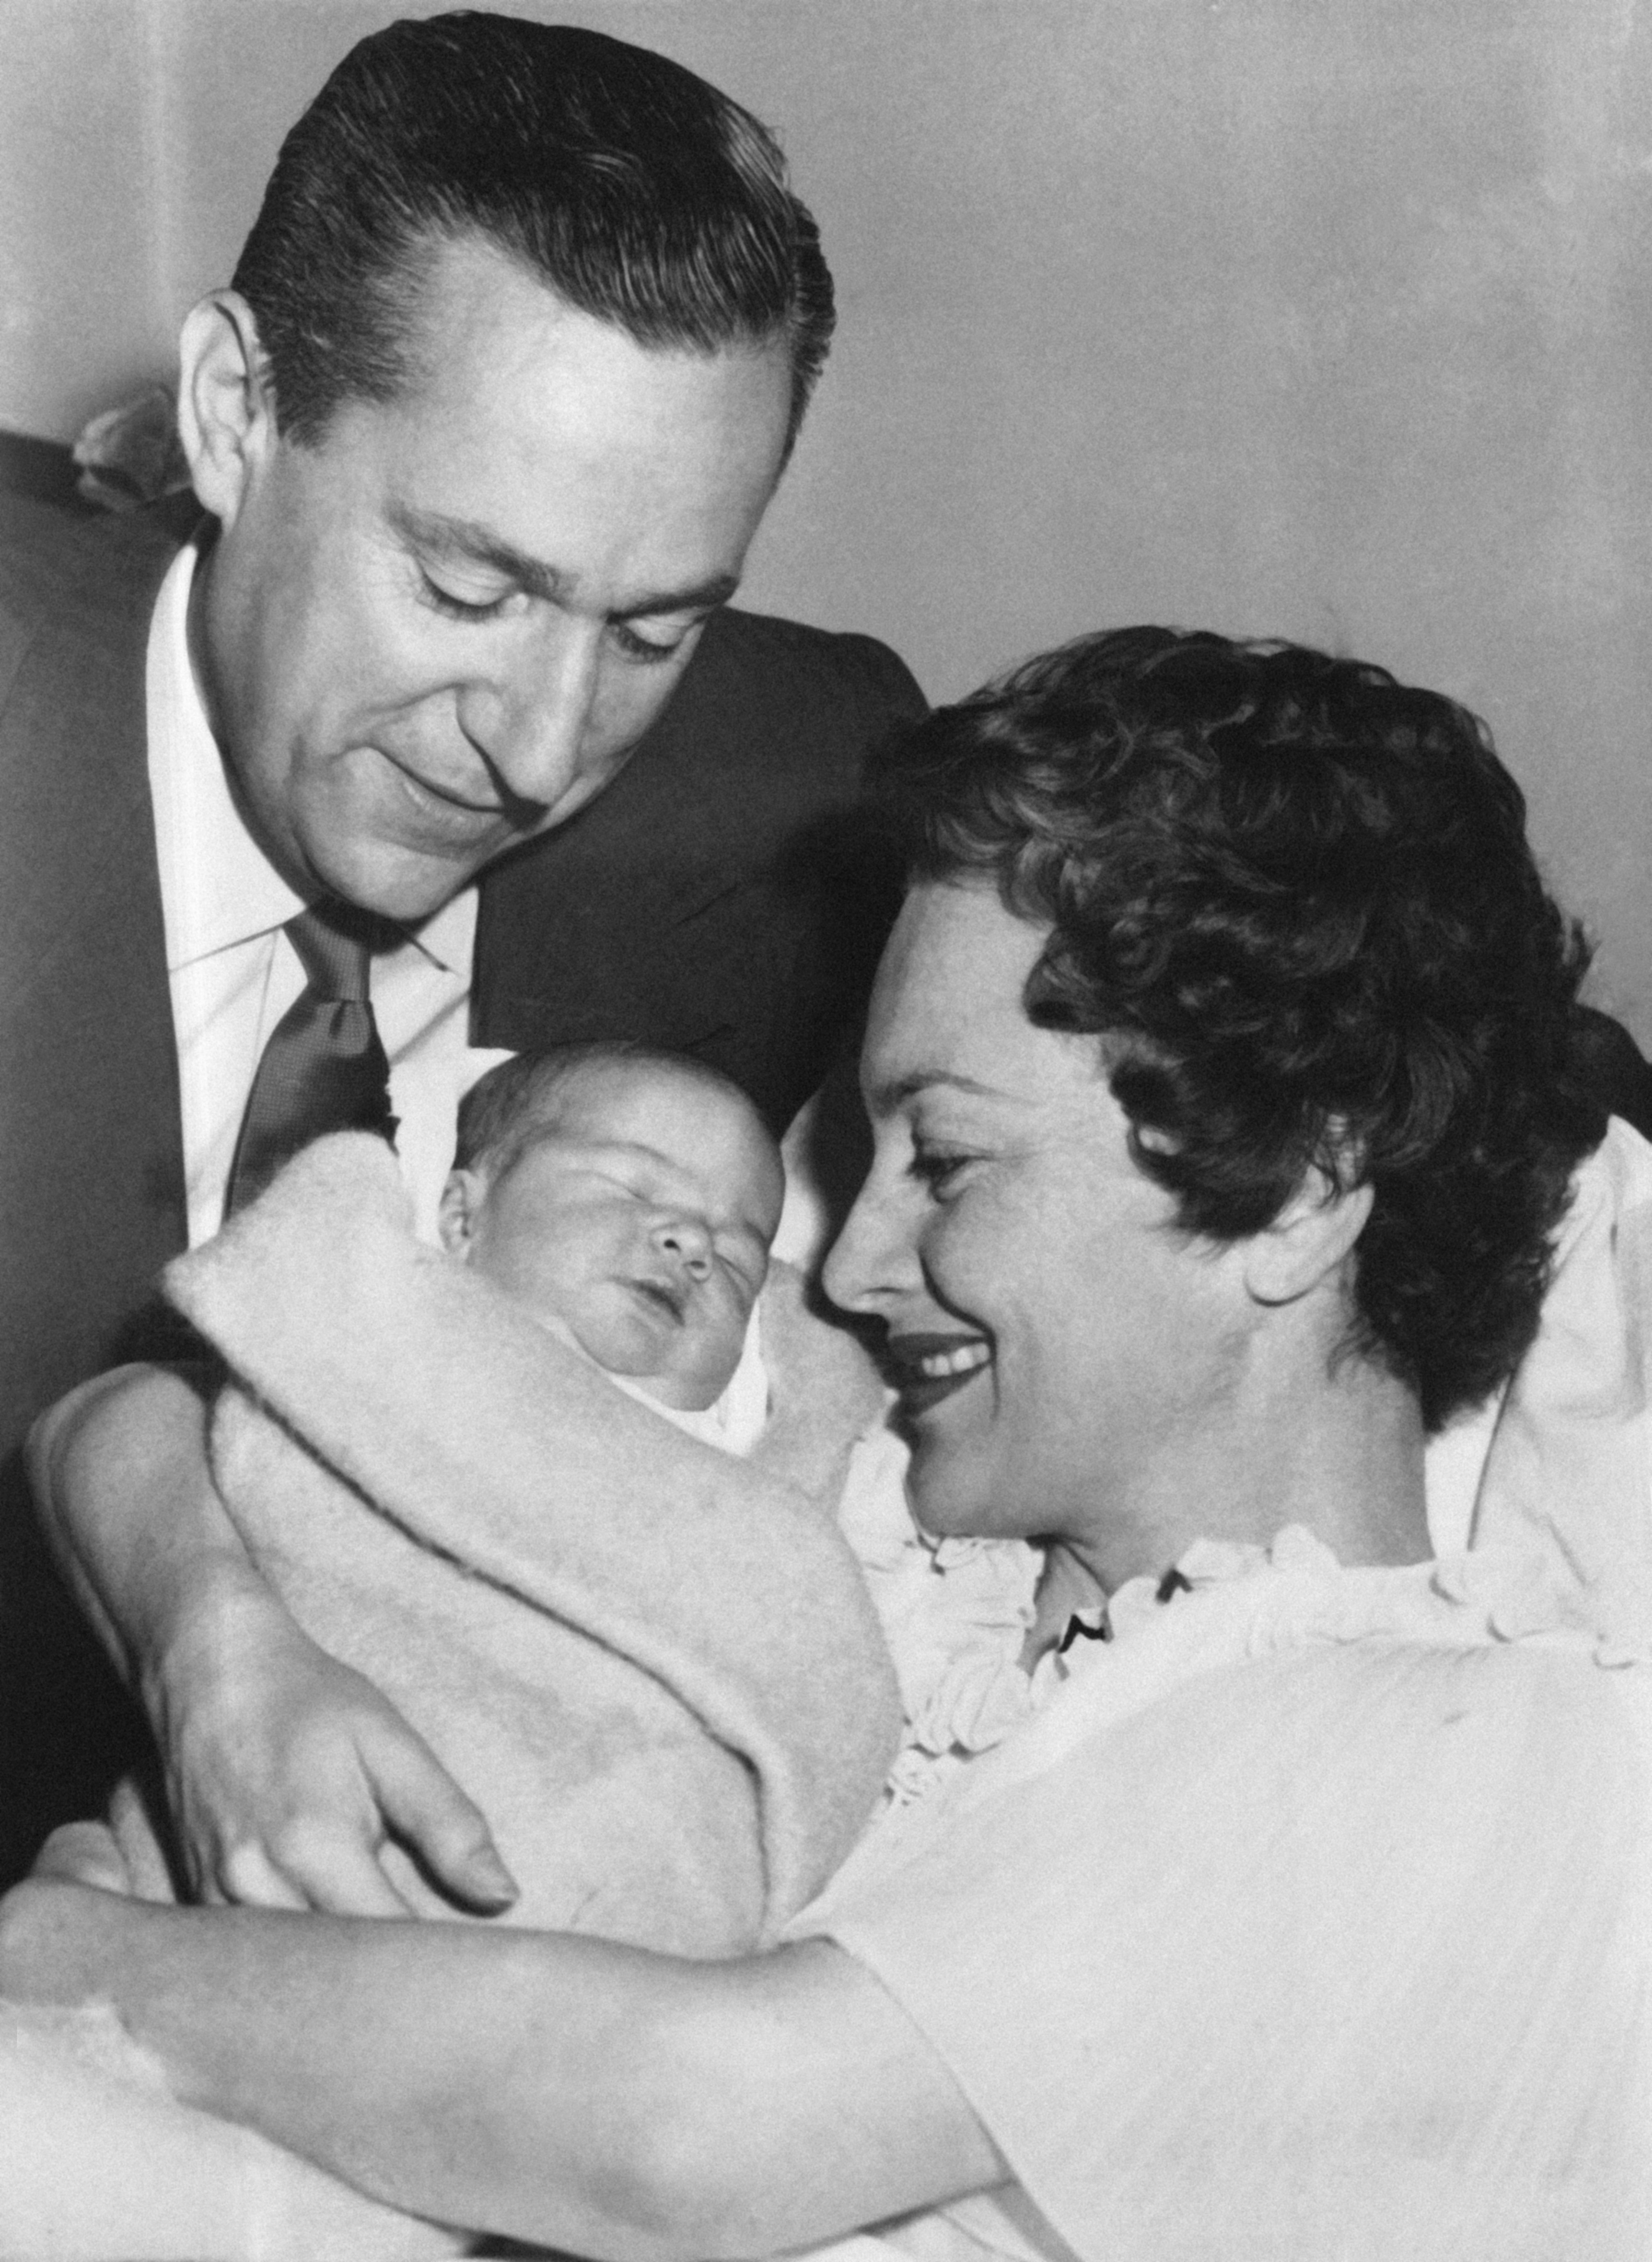 Olivia de Havilland and Pierre Galante welcome their daughter Gisèle in Paris, France, on July 21, 1957. | Source: Keystone-France/Gamma-Rapho/Getty Images